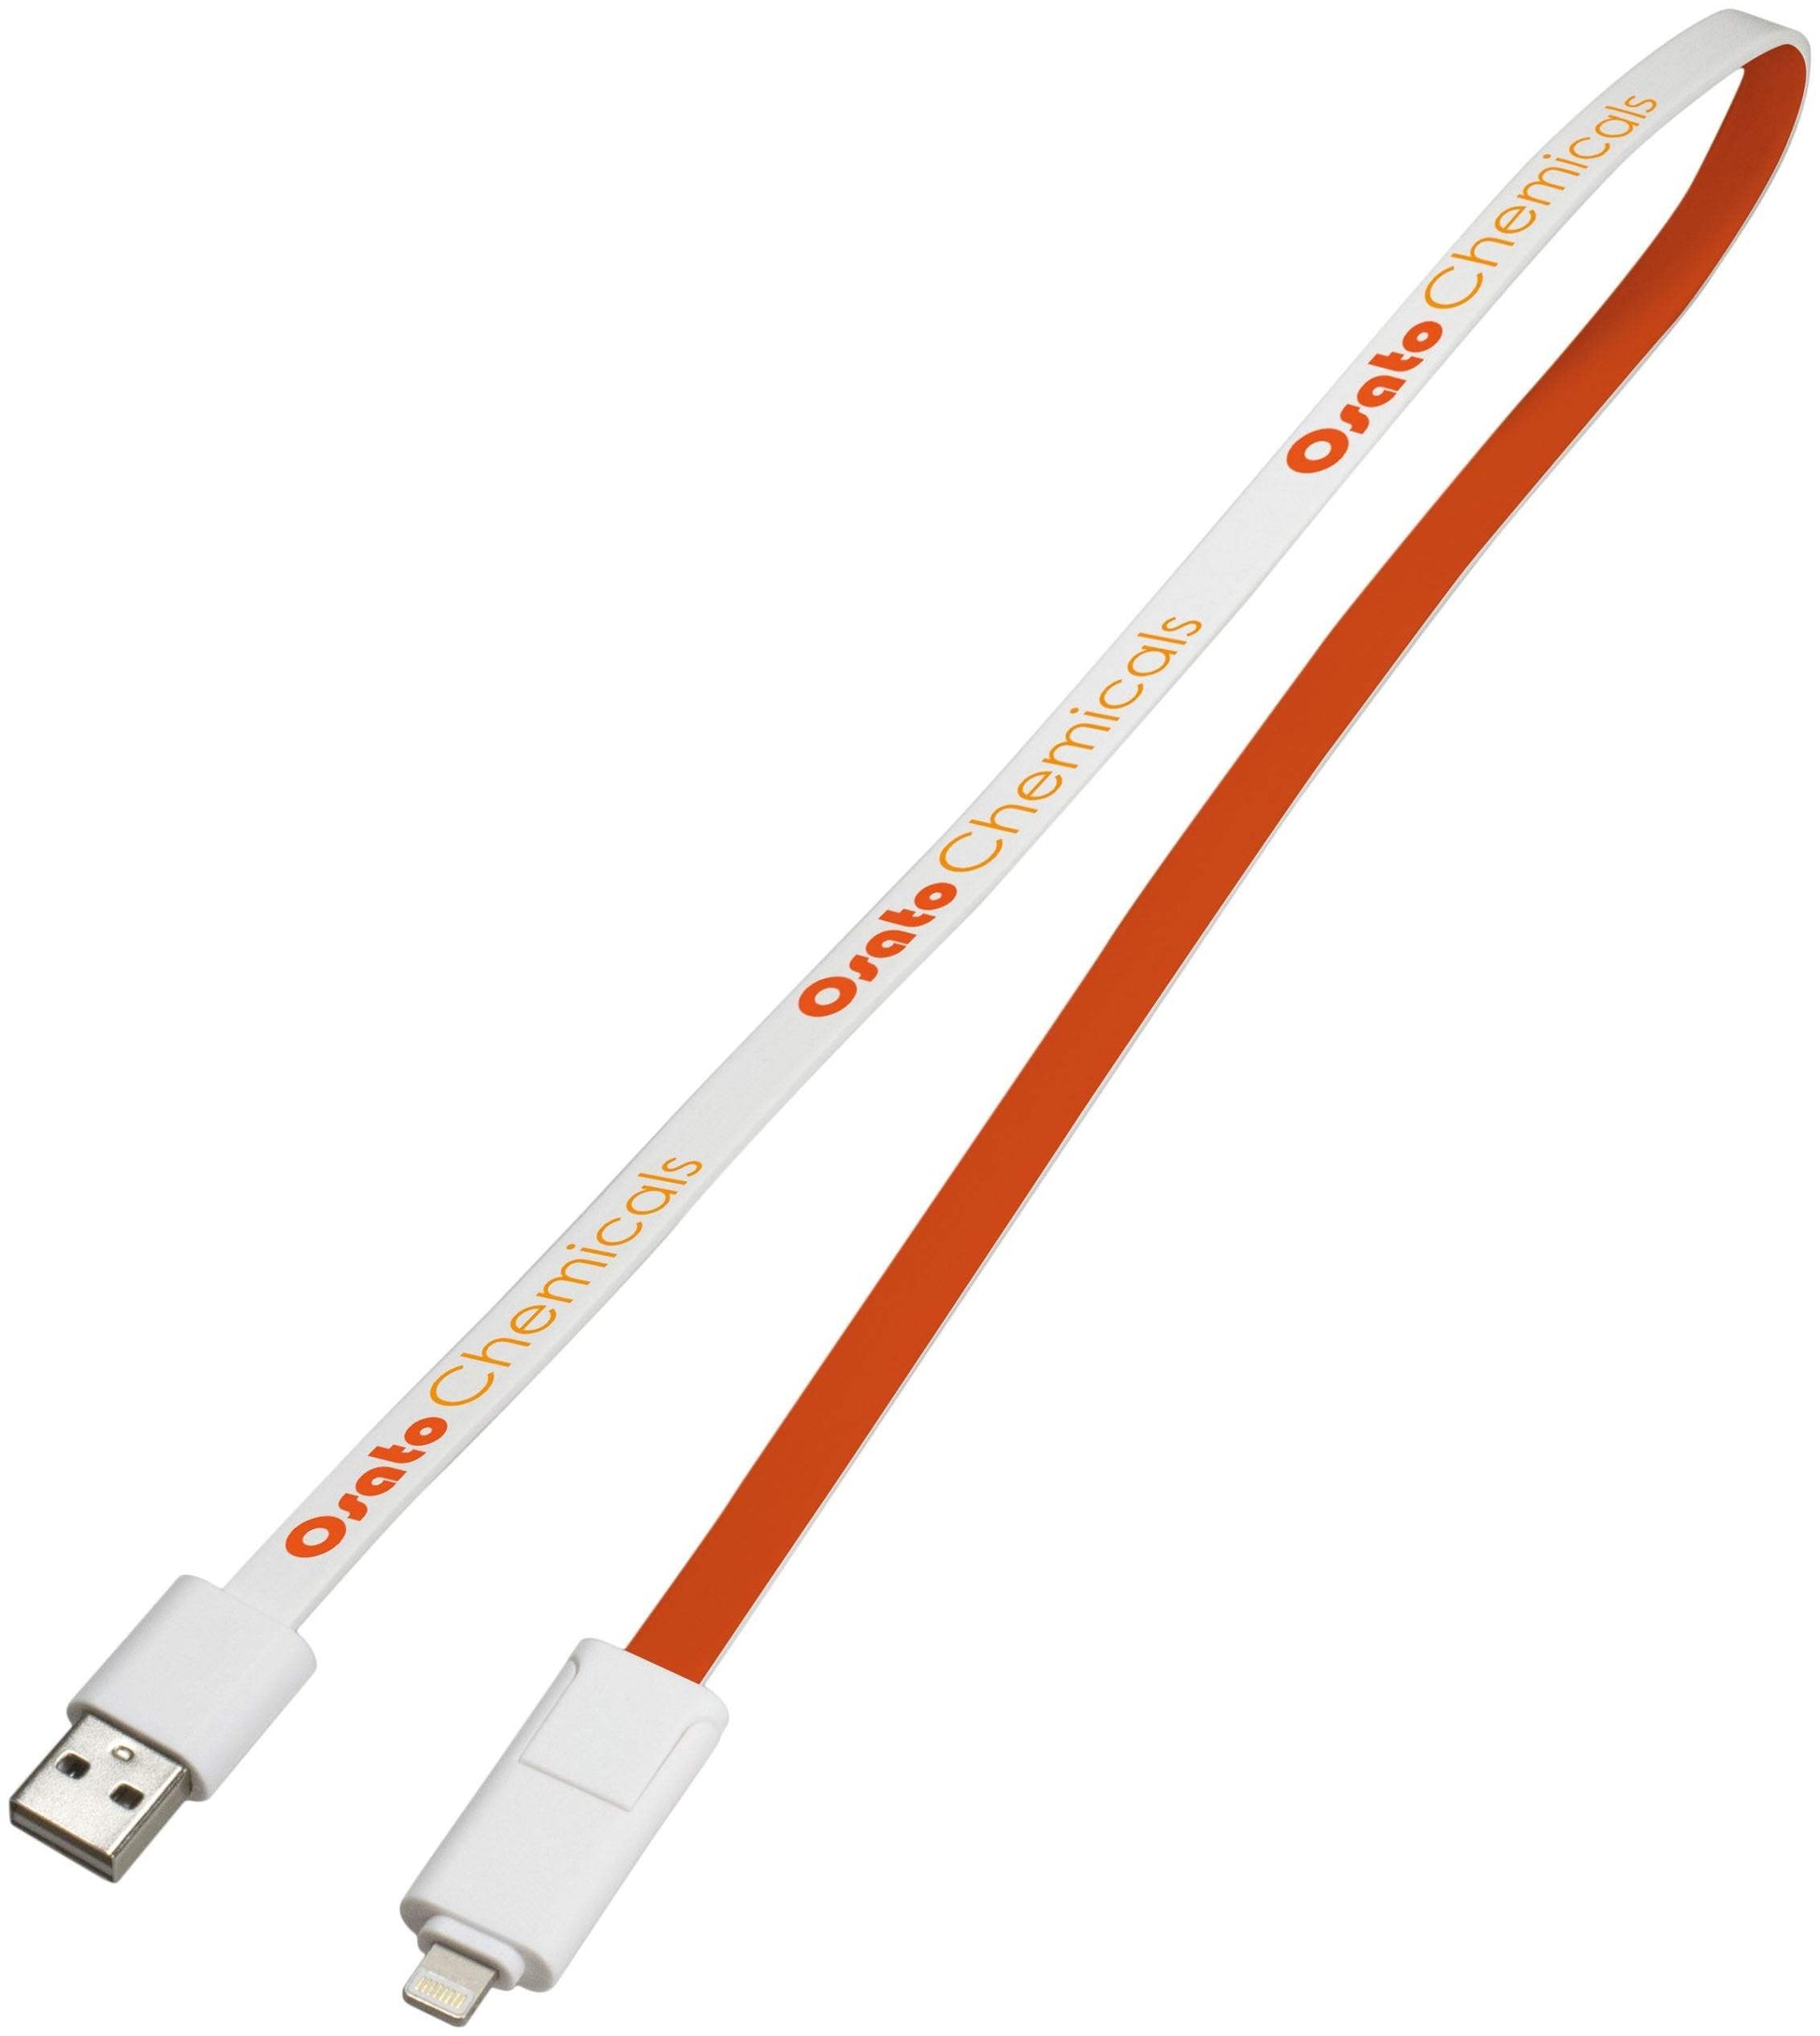 Panoflex Branded Cables - The Luxury Promotional Gifts Company Limited